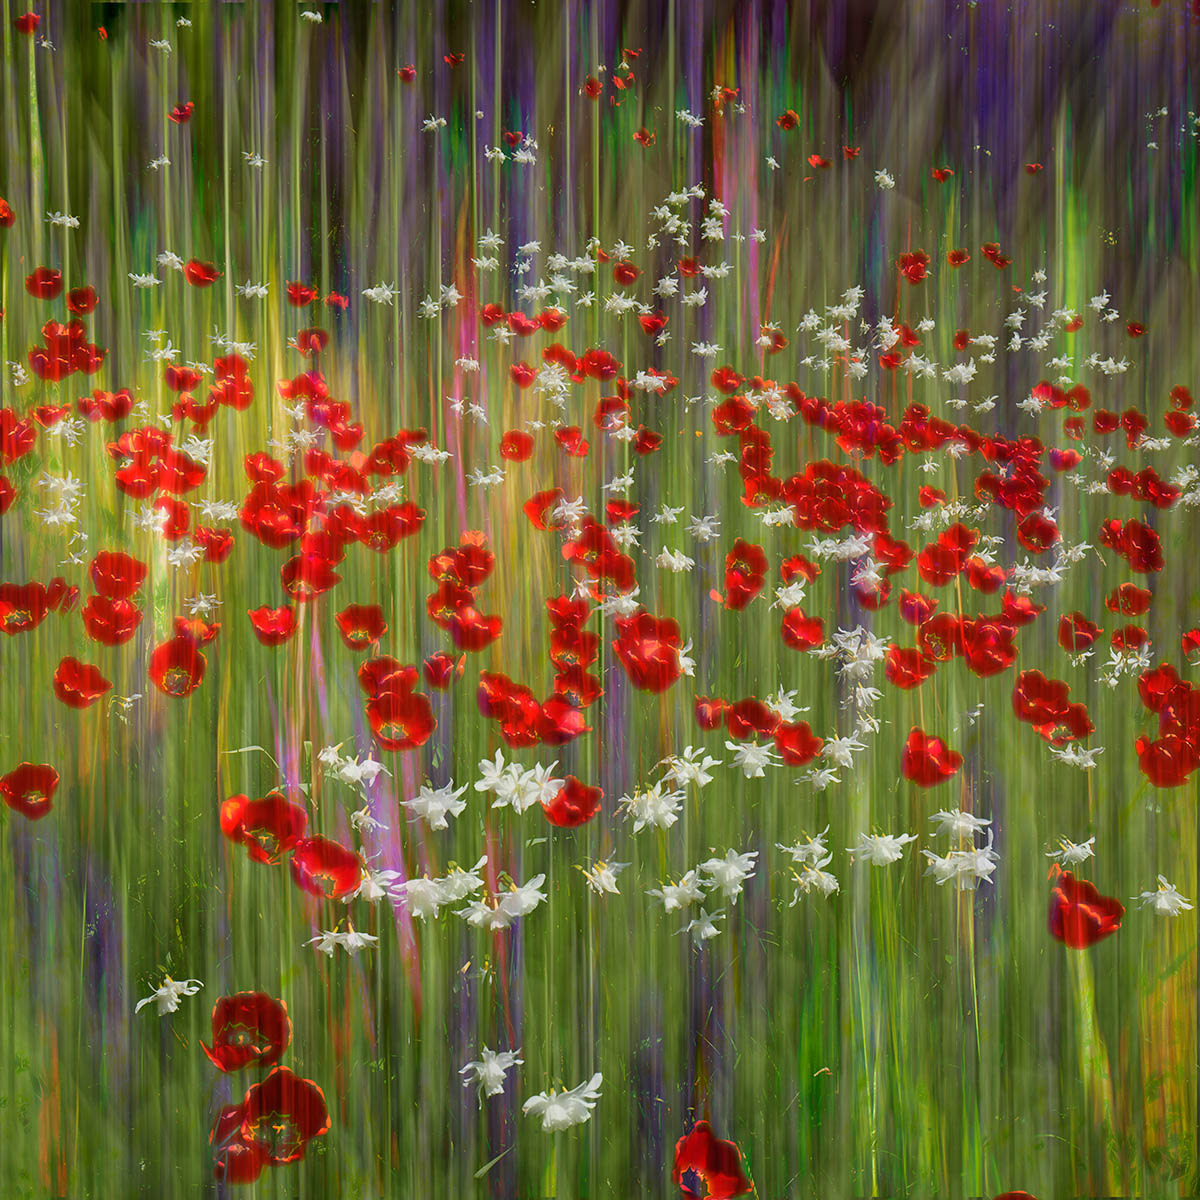 Floral Dreams, © Greg Vivash, 3rd place, International Garden Photographer of the Year — IGPOTY